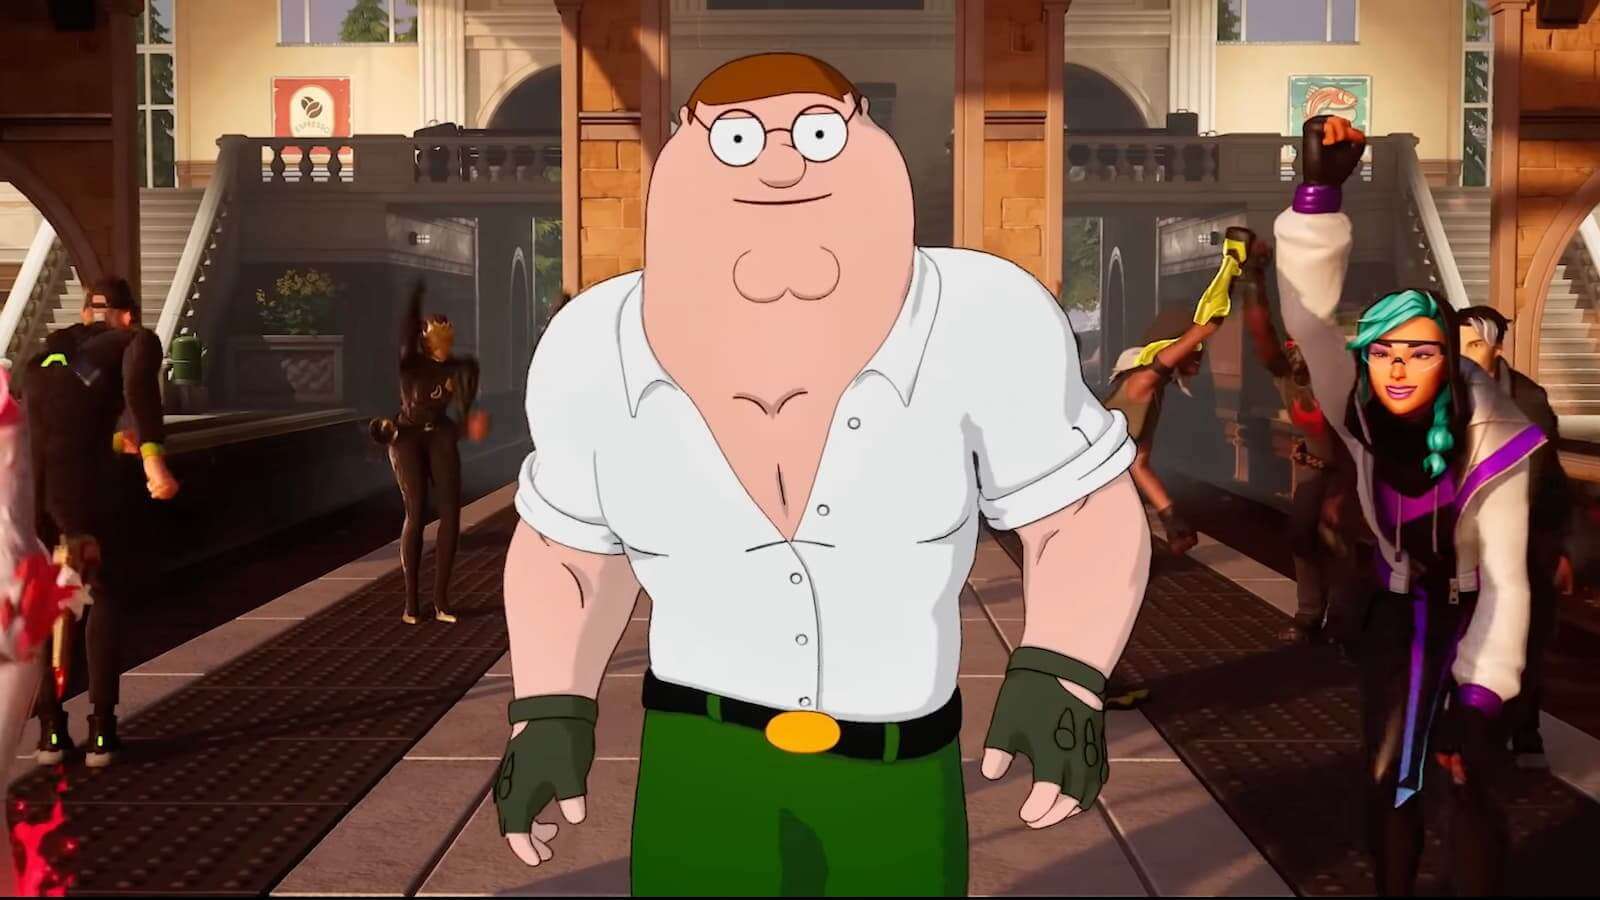 Fortnite players in awe of how hot "GigaChad" Peter Griffin is